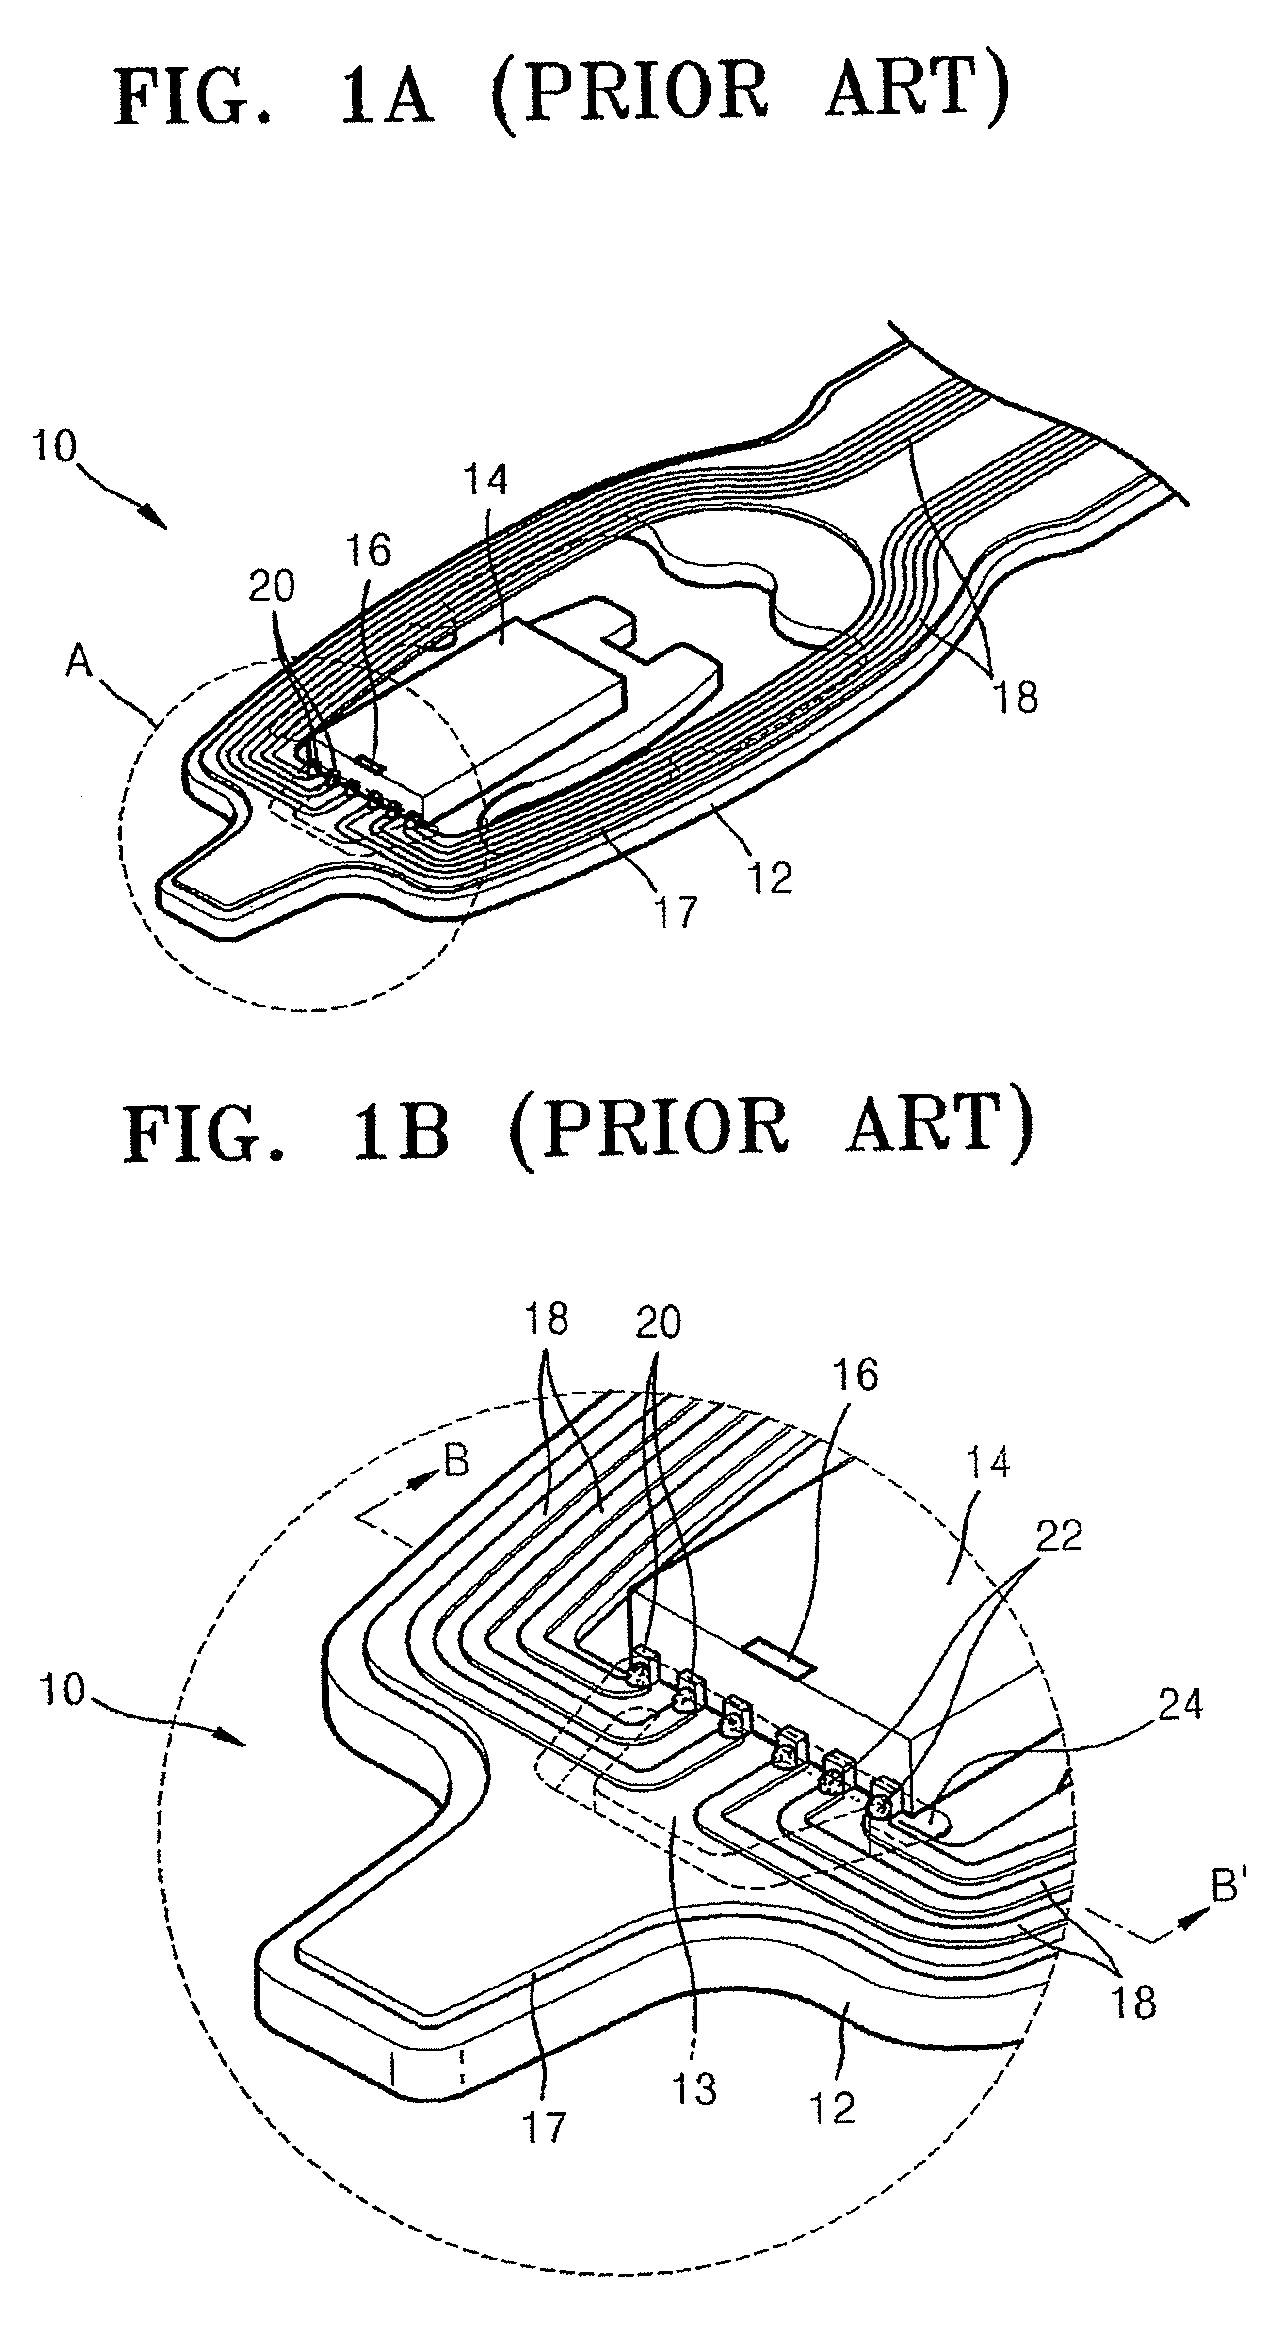 Head gimbal assembly of hard disk drive having support element in a bonding region of a slider